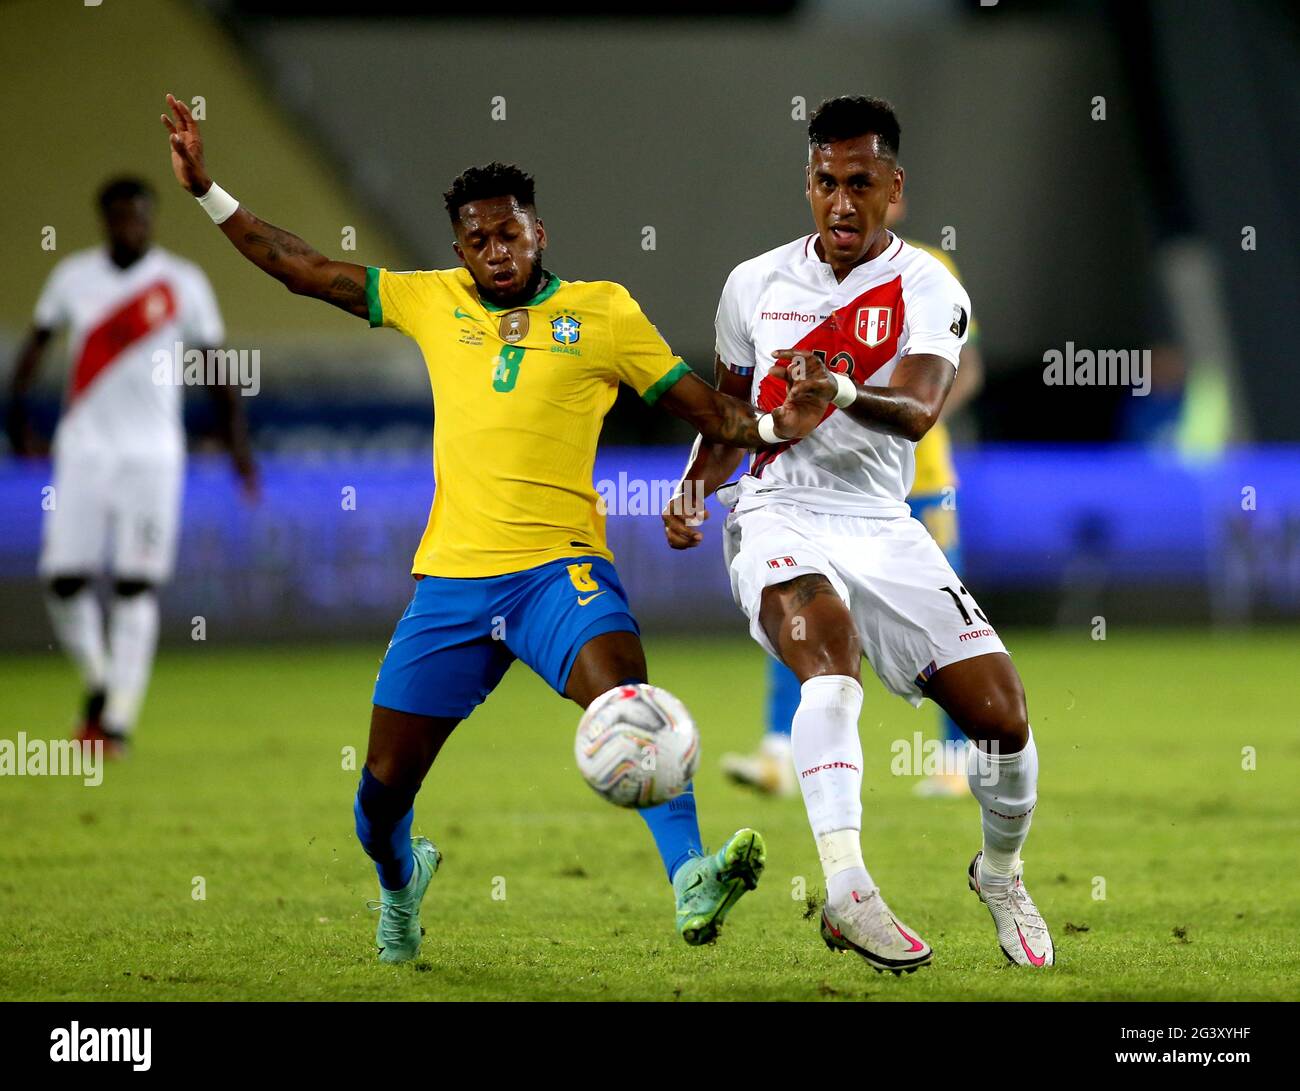 RIO DE JANEIRO, BRAZIL - JUNE 17: : Fred of Brazil competes for the ball with Renato Tapia of Peru ,during the match between Brazil and Peru as part of Conmebol Copa America Brazil 2021 at Estadio Olímpico Nilton Santos on June 17, 2021 in Rio de Janeiro, Brazil. (Photo by MB Media) Stock Photo